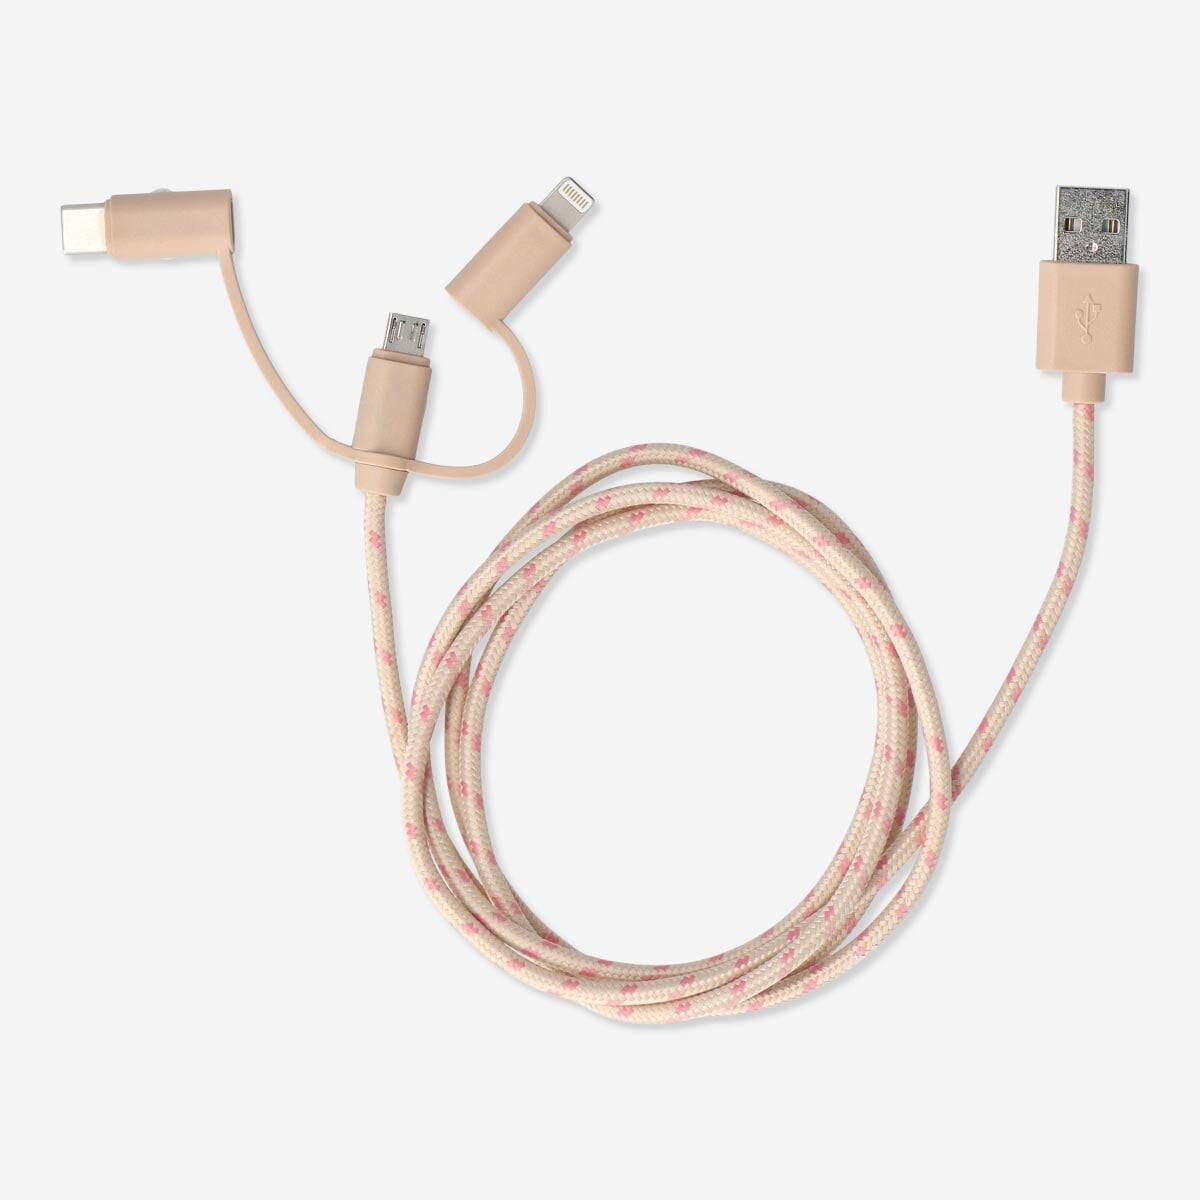 Charging cable. For USB-C, Micro USB and lightning €6| Flying Tiger  Copenhagen